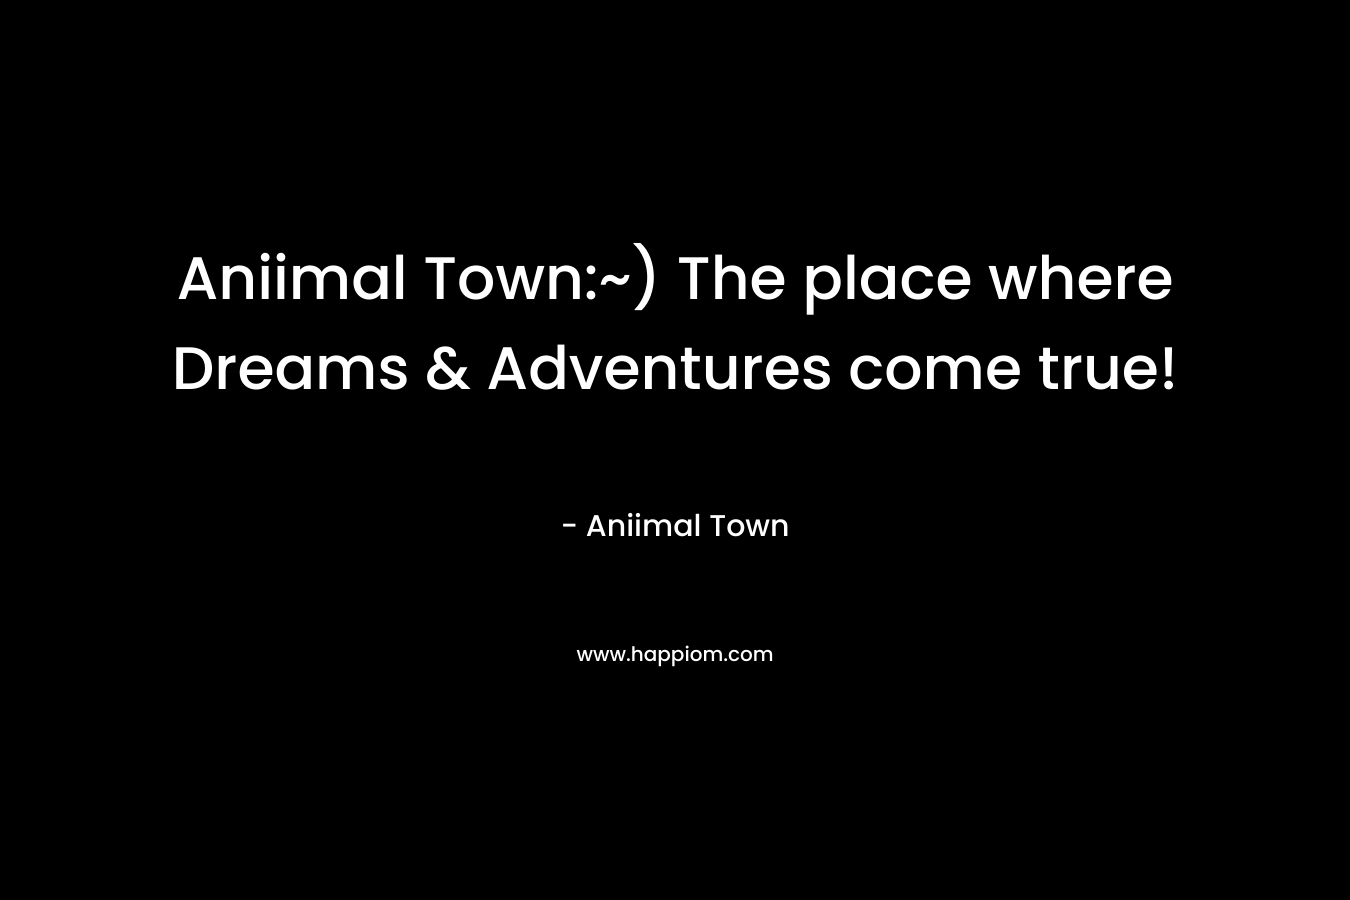 Aniimal Town:~) The place where Dreams & Adventures come true! – Aniimal Town